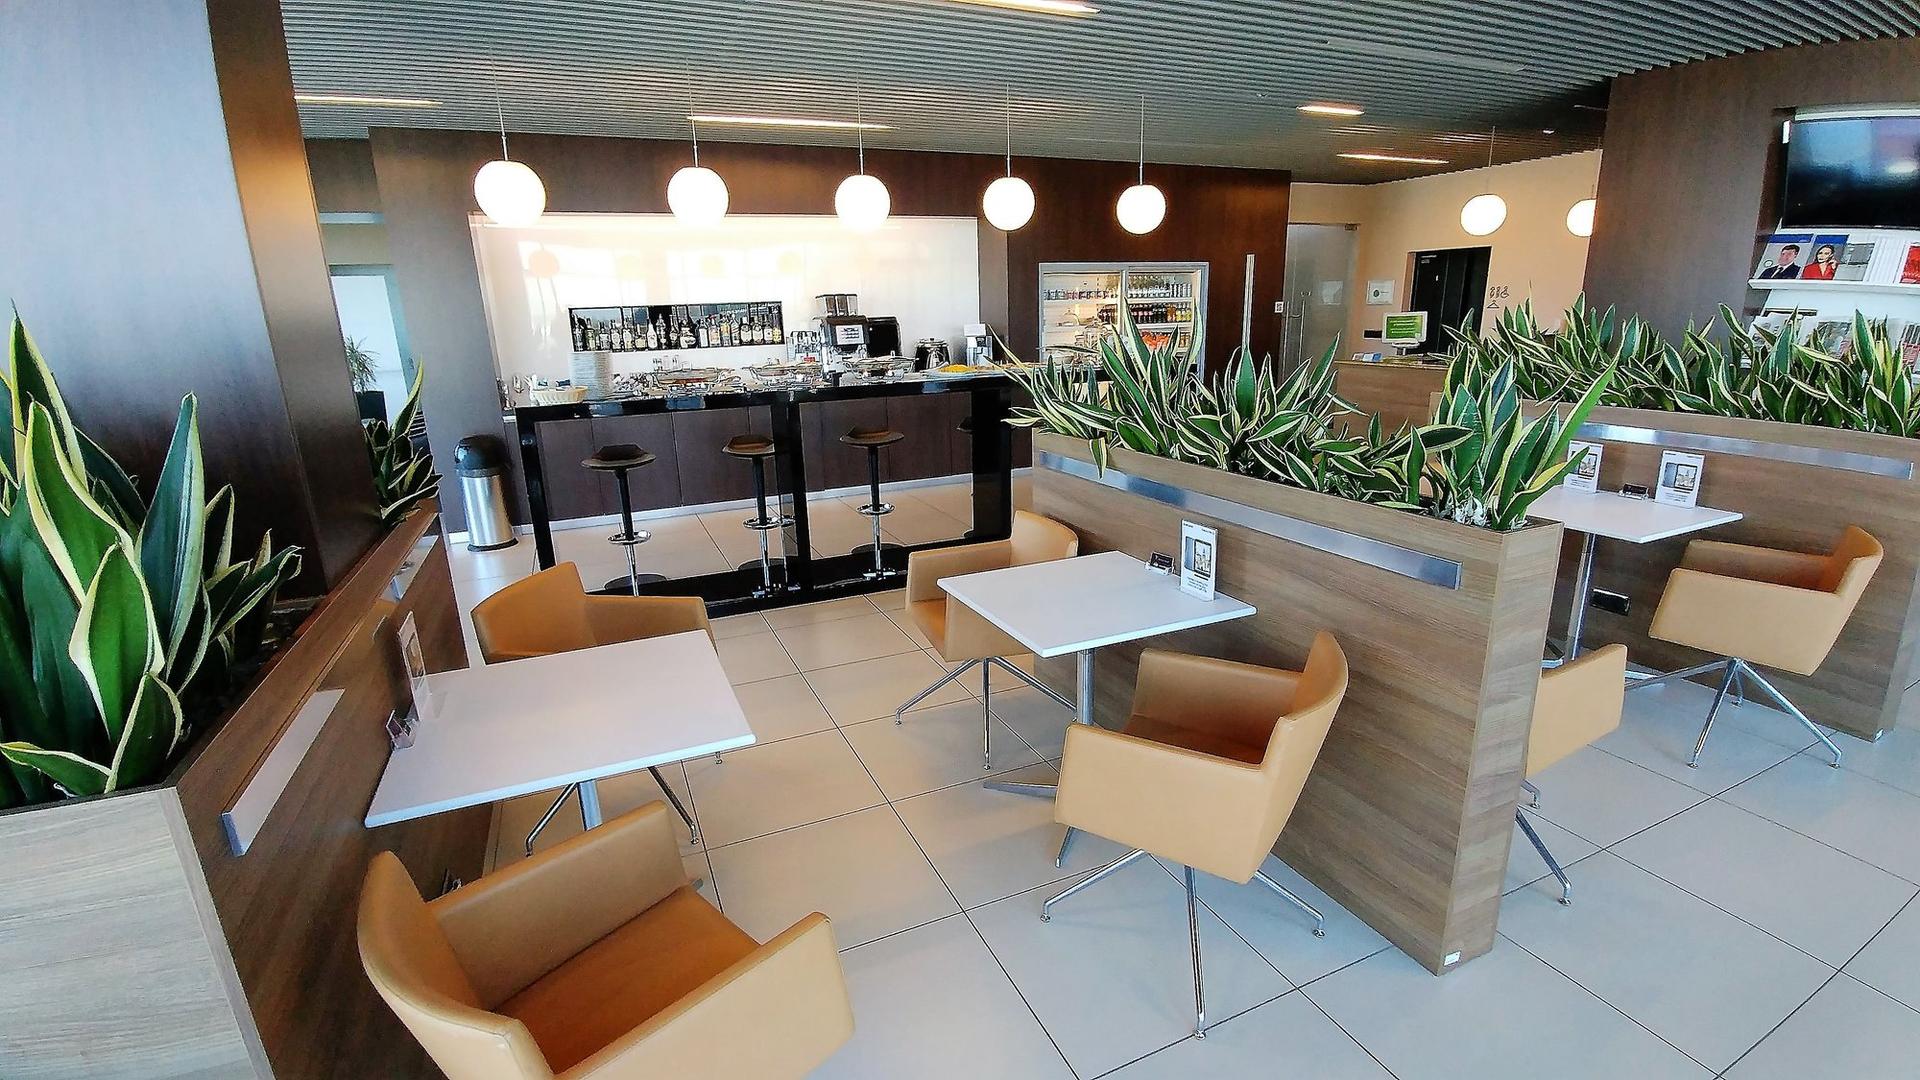 Business Lounge image 3 of 22